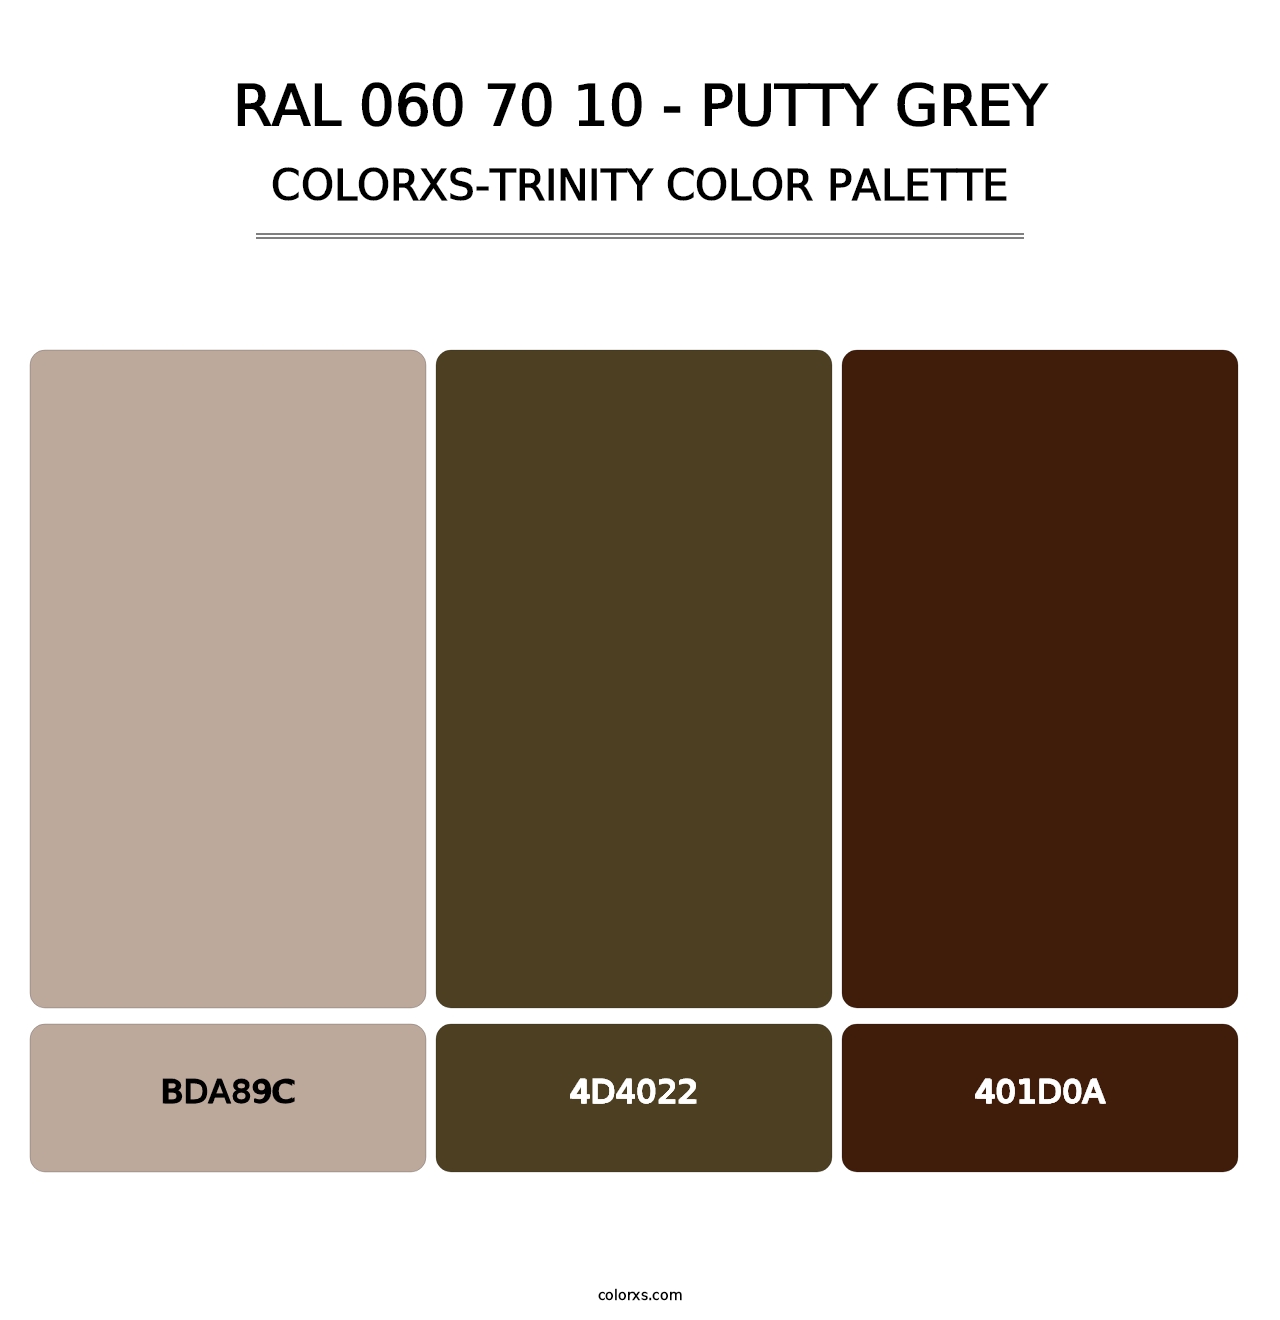 RAL 060 70 10 - Putty Grey - Colorxs Trinity Palette